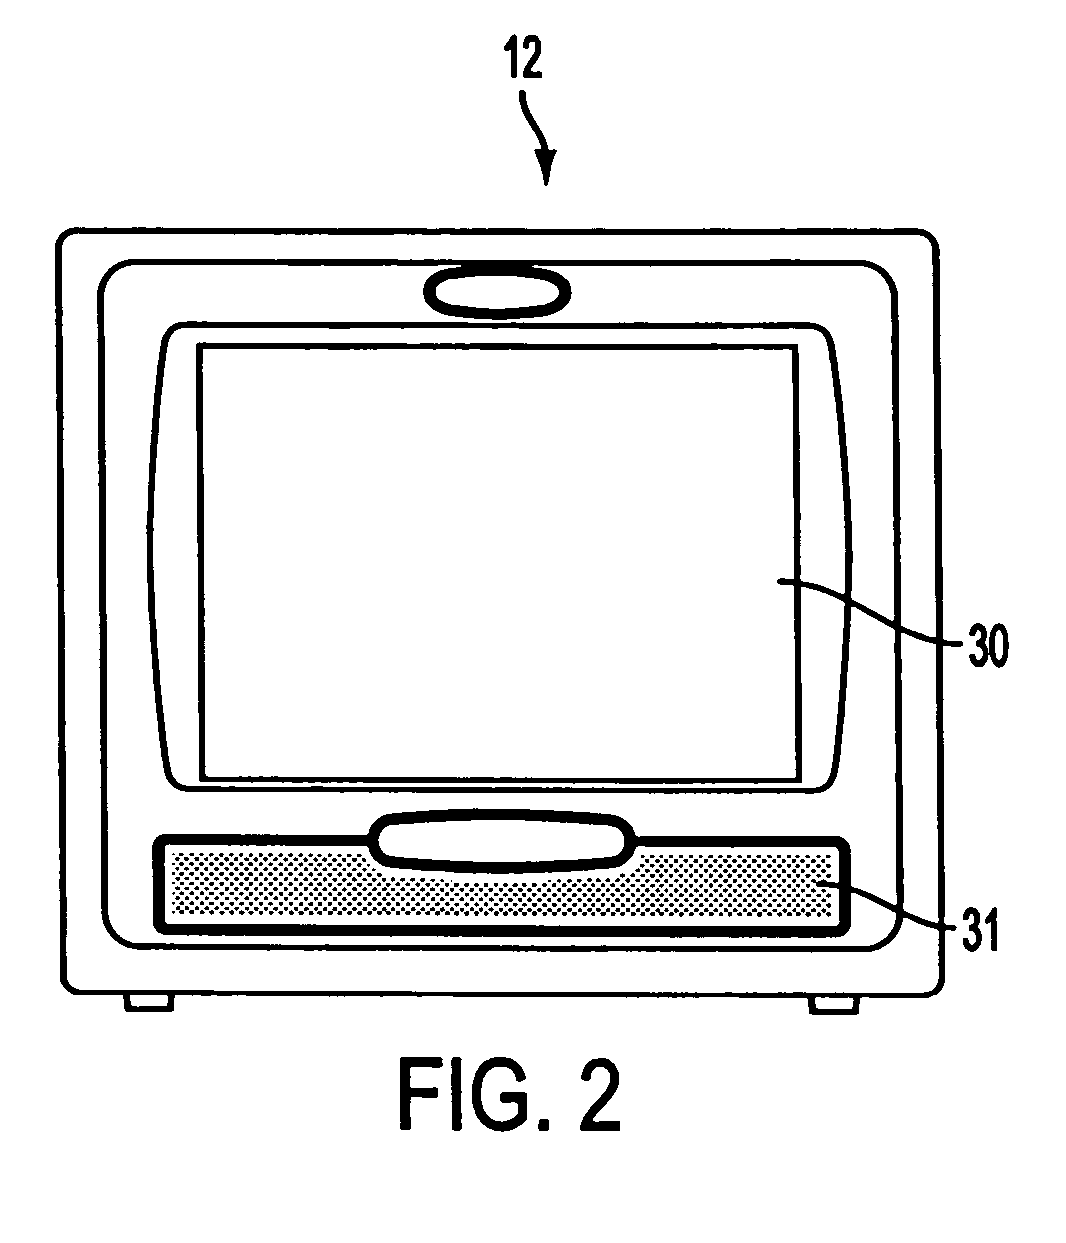 Apparatus for intraoperative neural monitoring